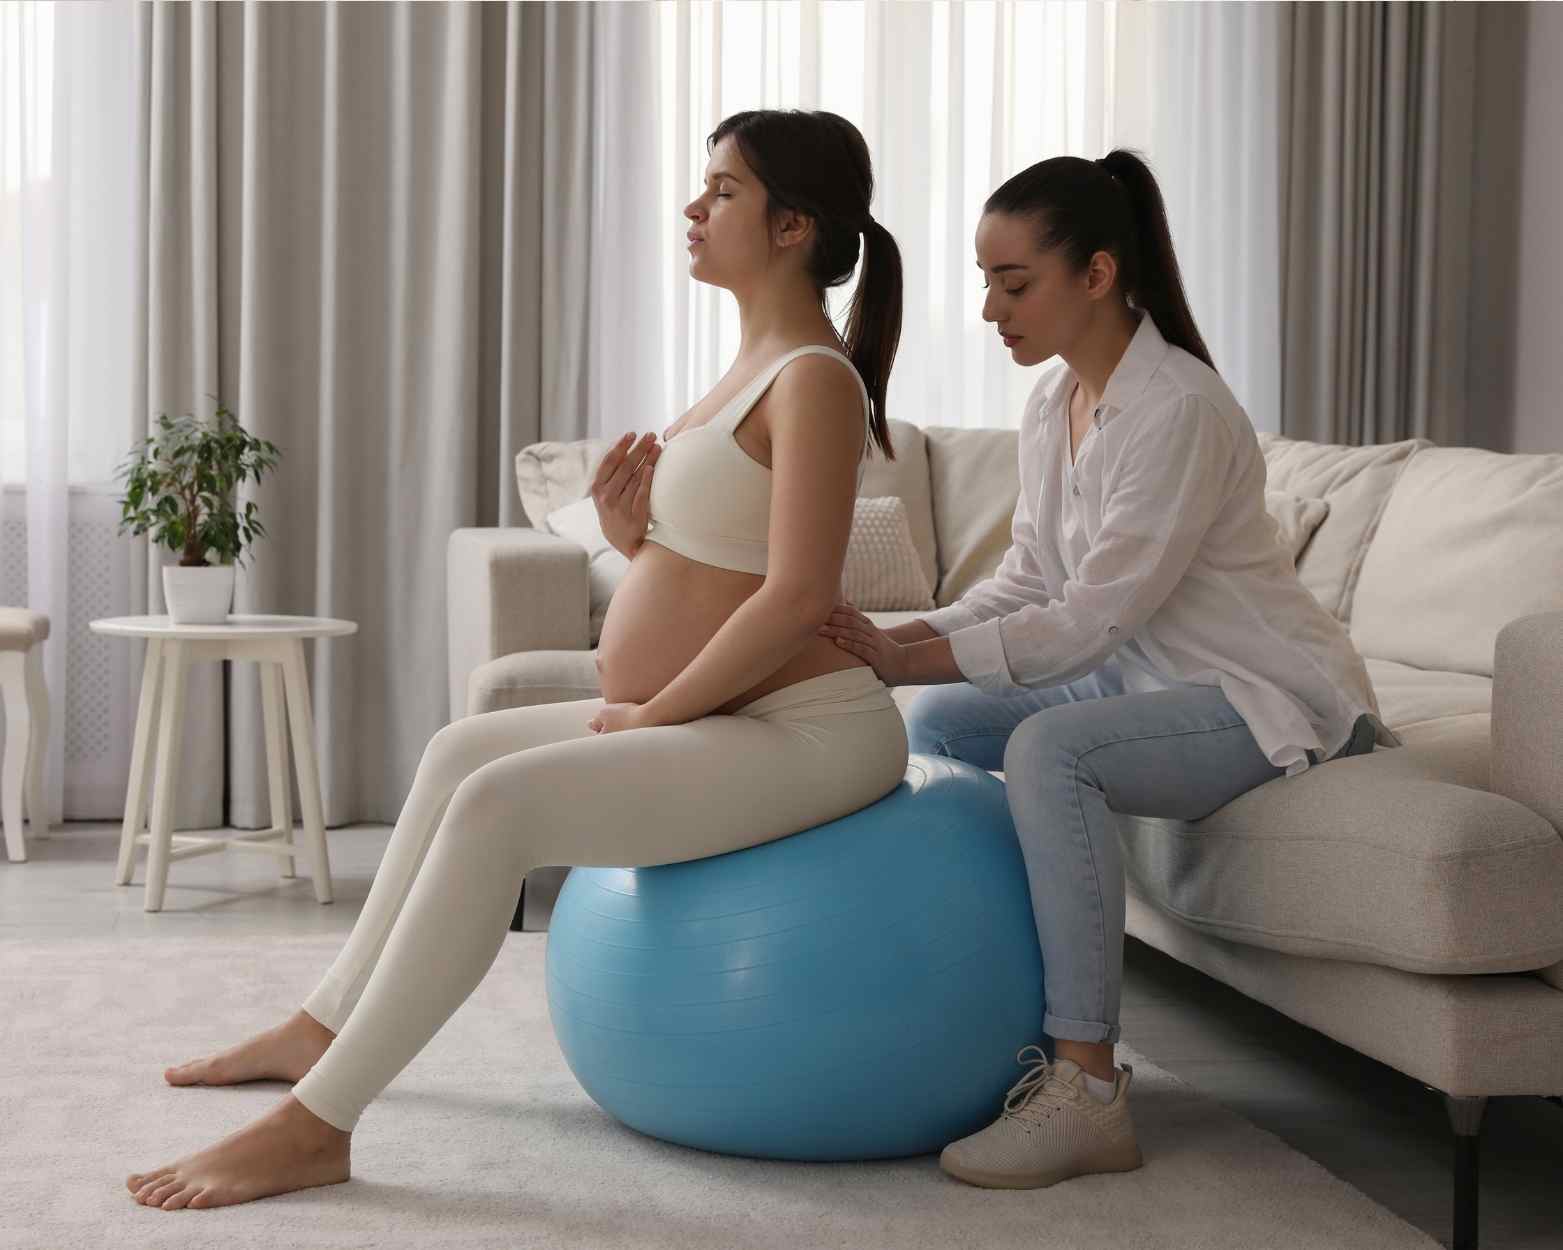 A pregnant woman on a birthing ball using her birth affirmations for an unmedicated labor.